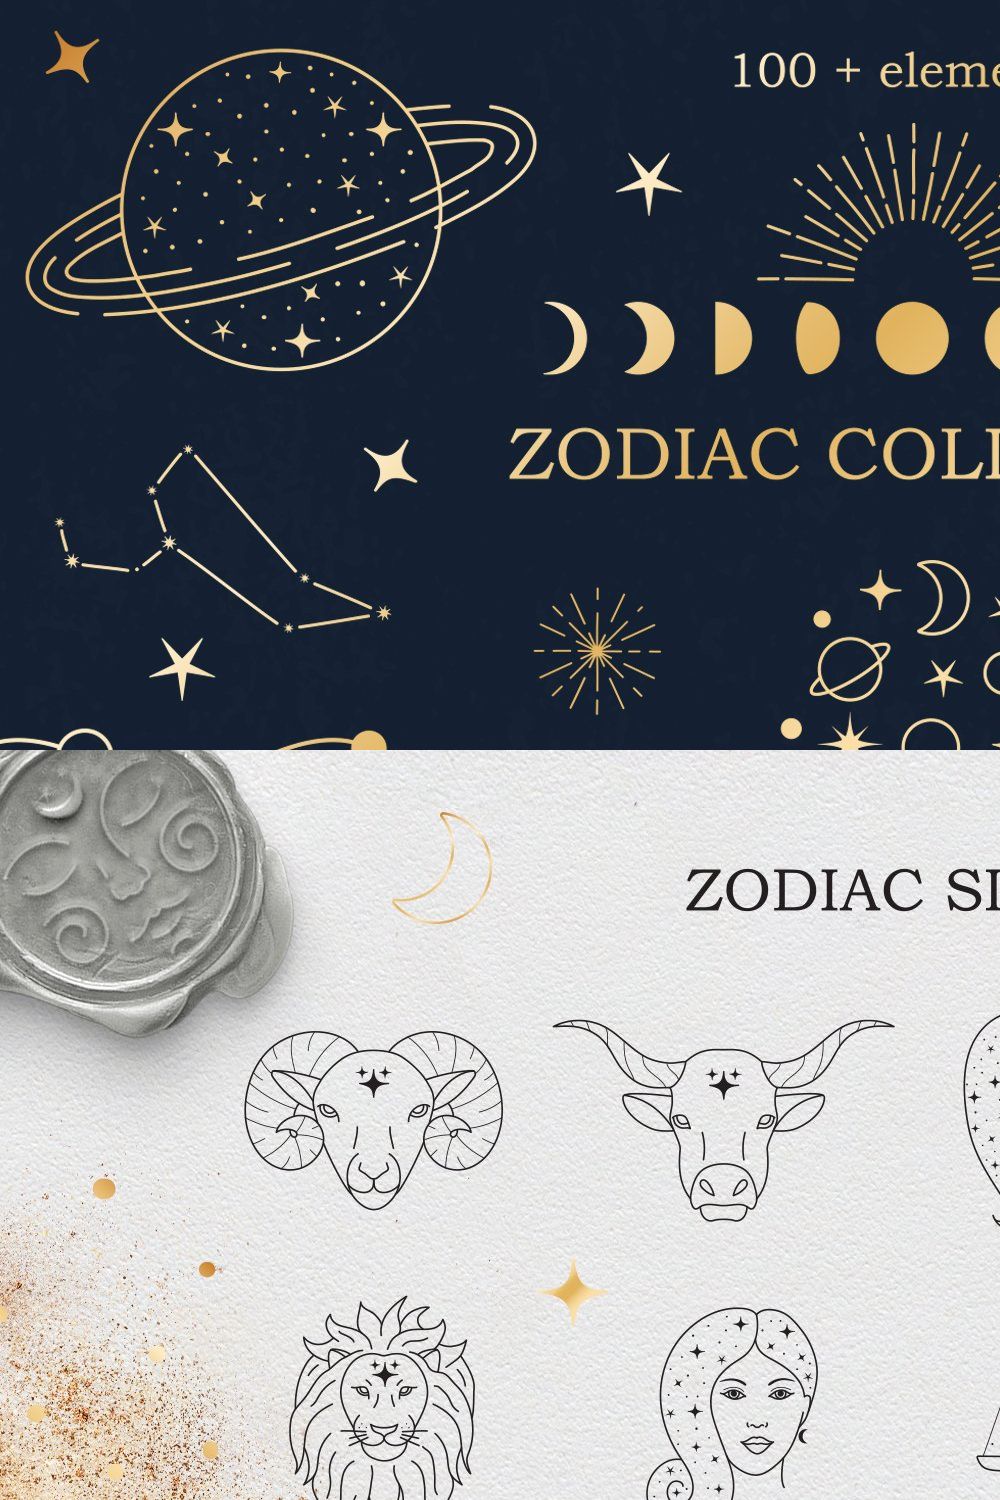 Zodiac signs and constellations pinterest preview image.